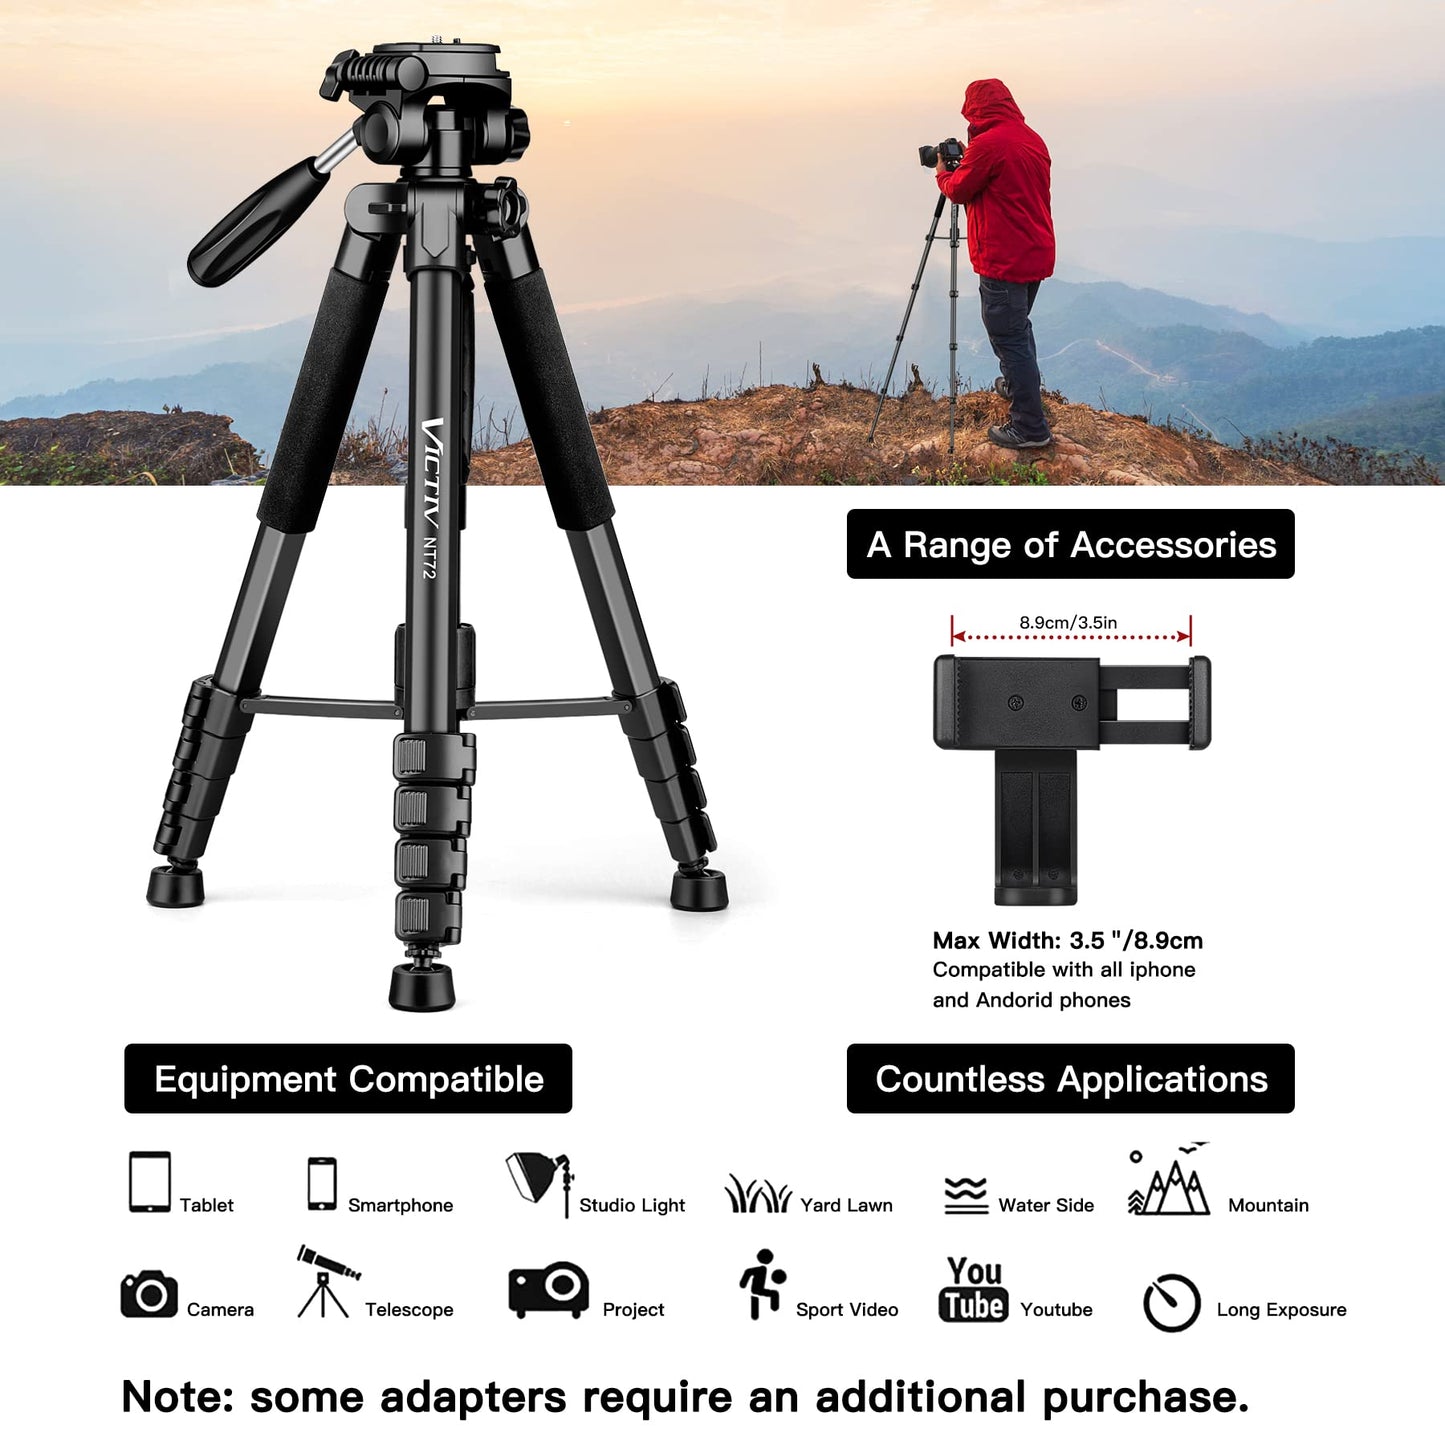 Victiv 72-inch Camera Tripod Aluminum Monopod T72 Max. Height 182cm- Lightweight and Compact for Travel with 3-way Swivel Head and 2 Quick Release Plates for DSLR Video Shooting - Black